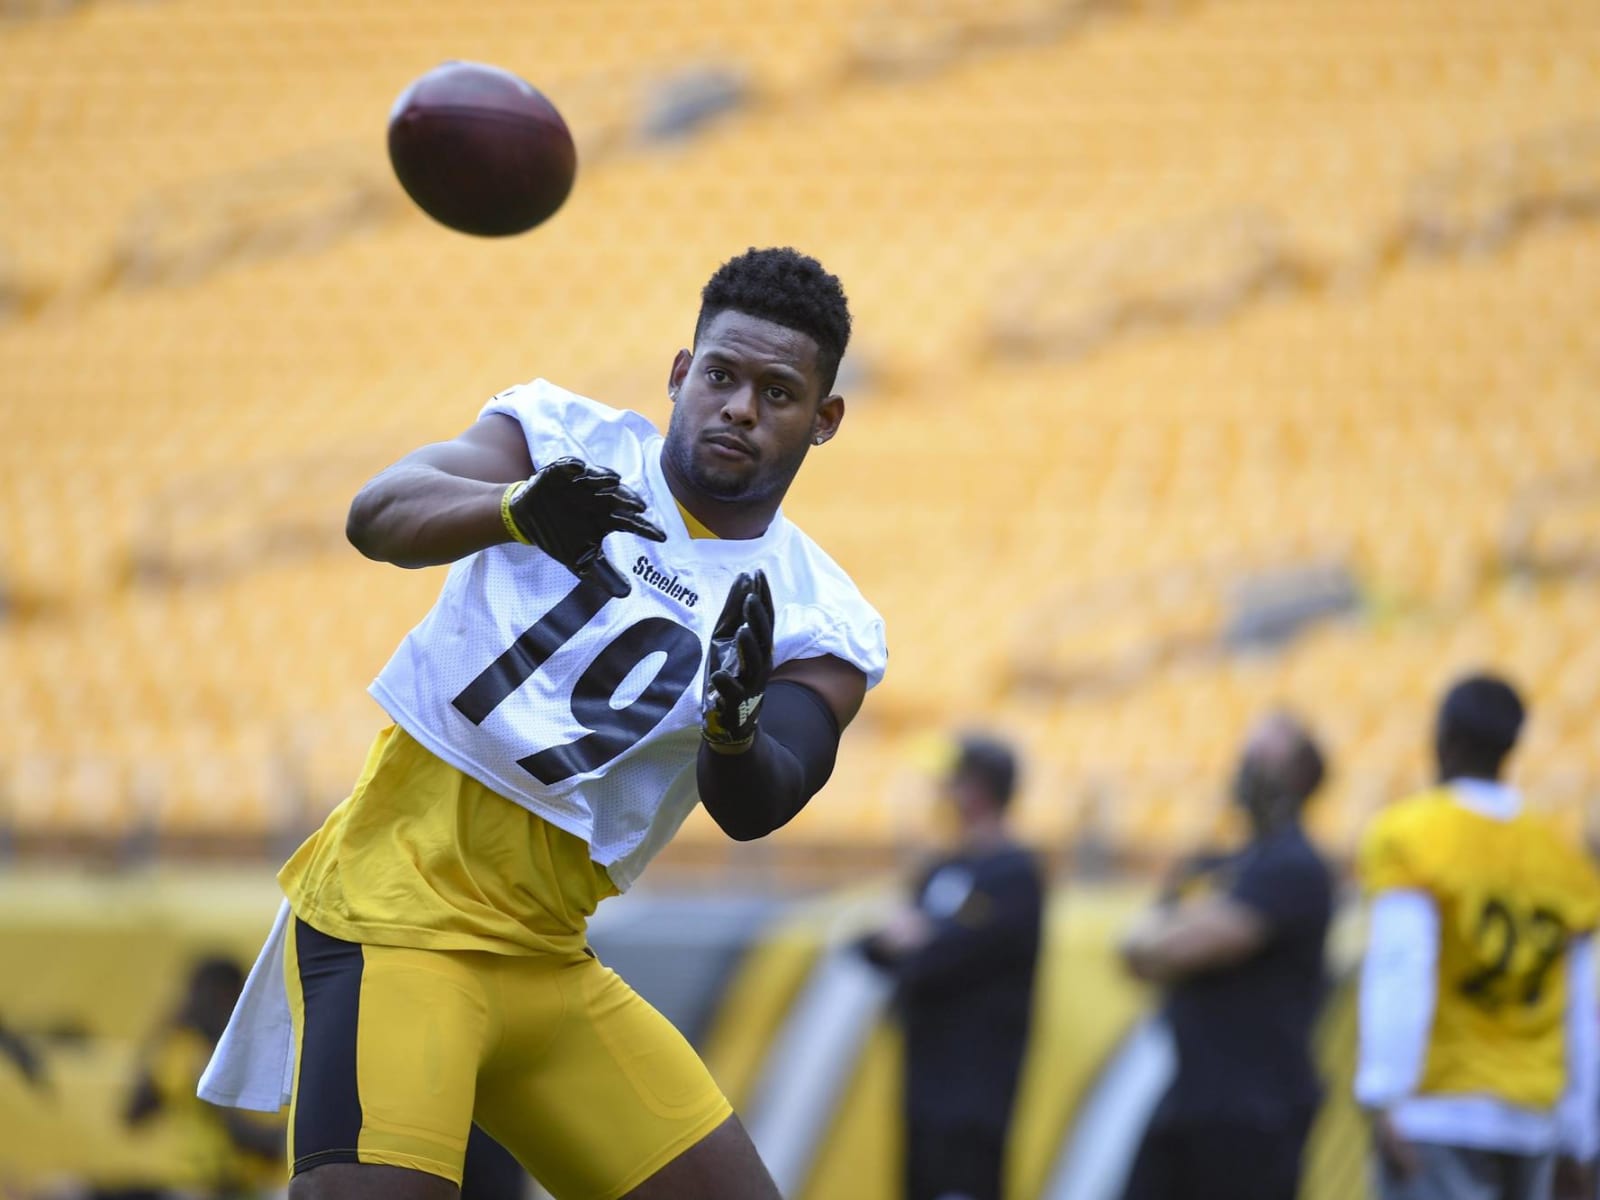 Steelers great Rod Woodson thinks JuJu Smith-Schuster should be traded